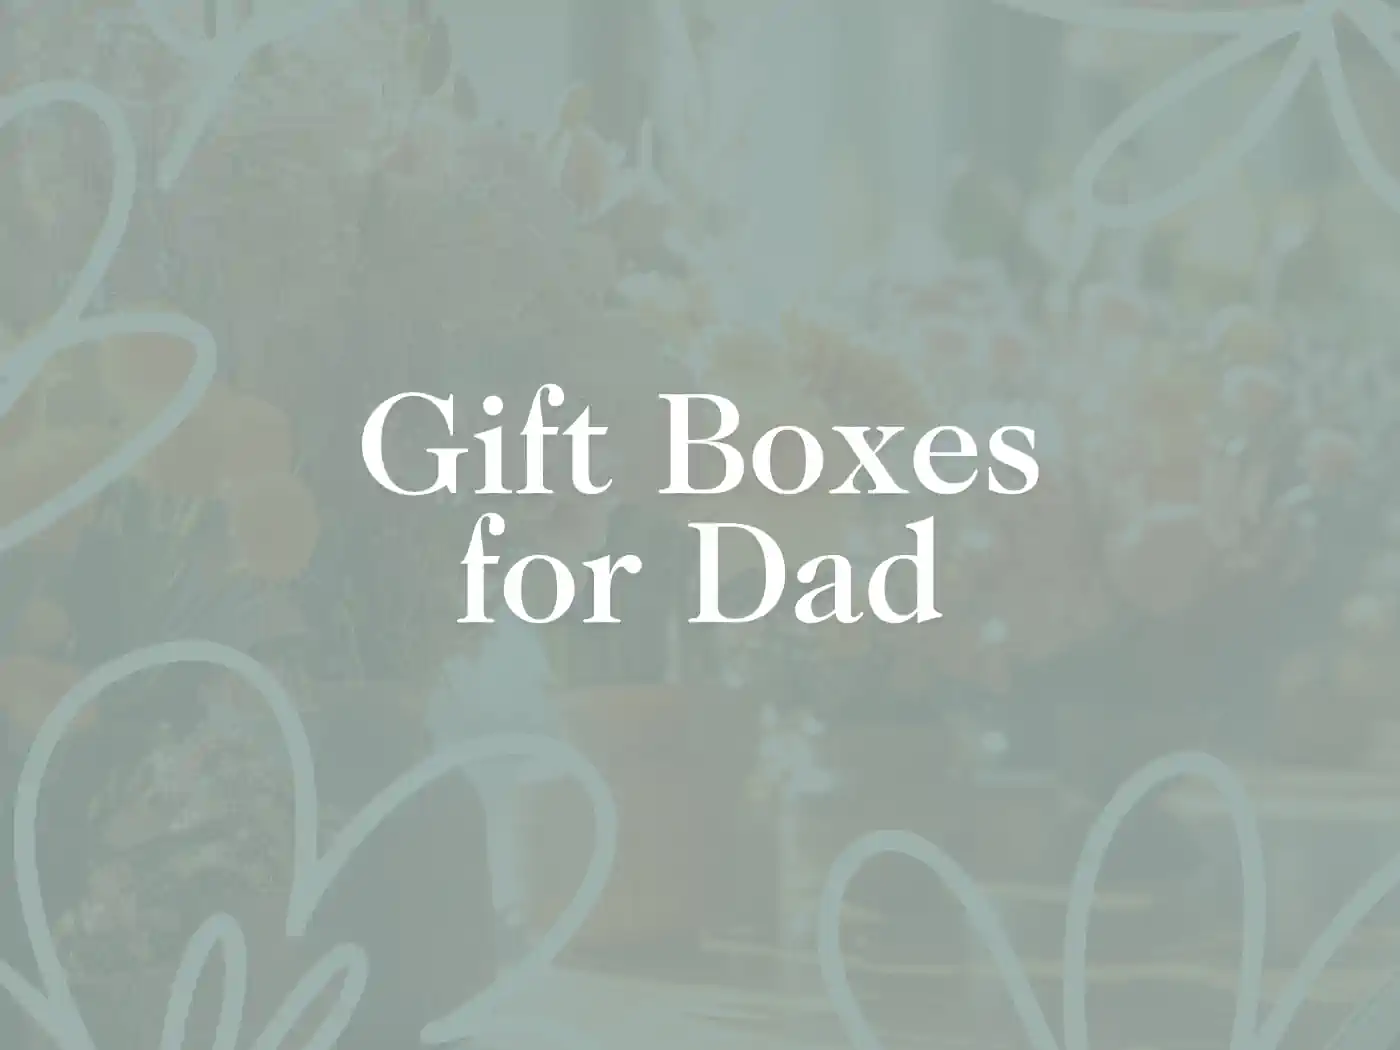 Text 'Gift Boxes for Dad' over a blurred floral background, representing thoughtful presents for fathers. Fabulous Flowers and Gifts.